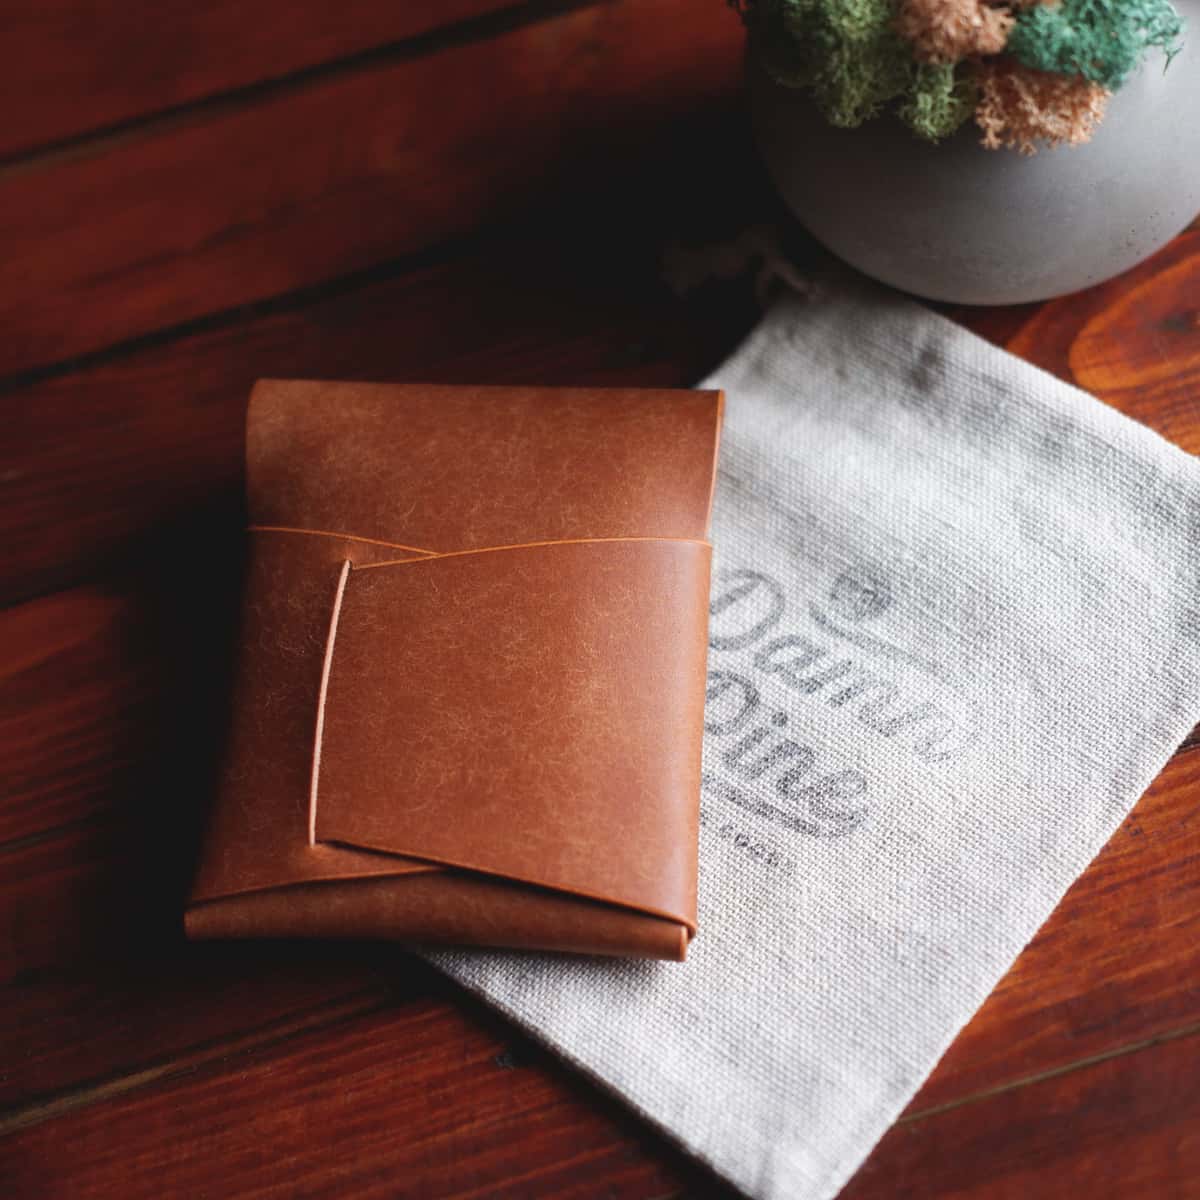 The Lodgepole Stitchless Wallet in Cognac Pueblo leather - quick access compartment